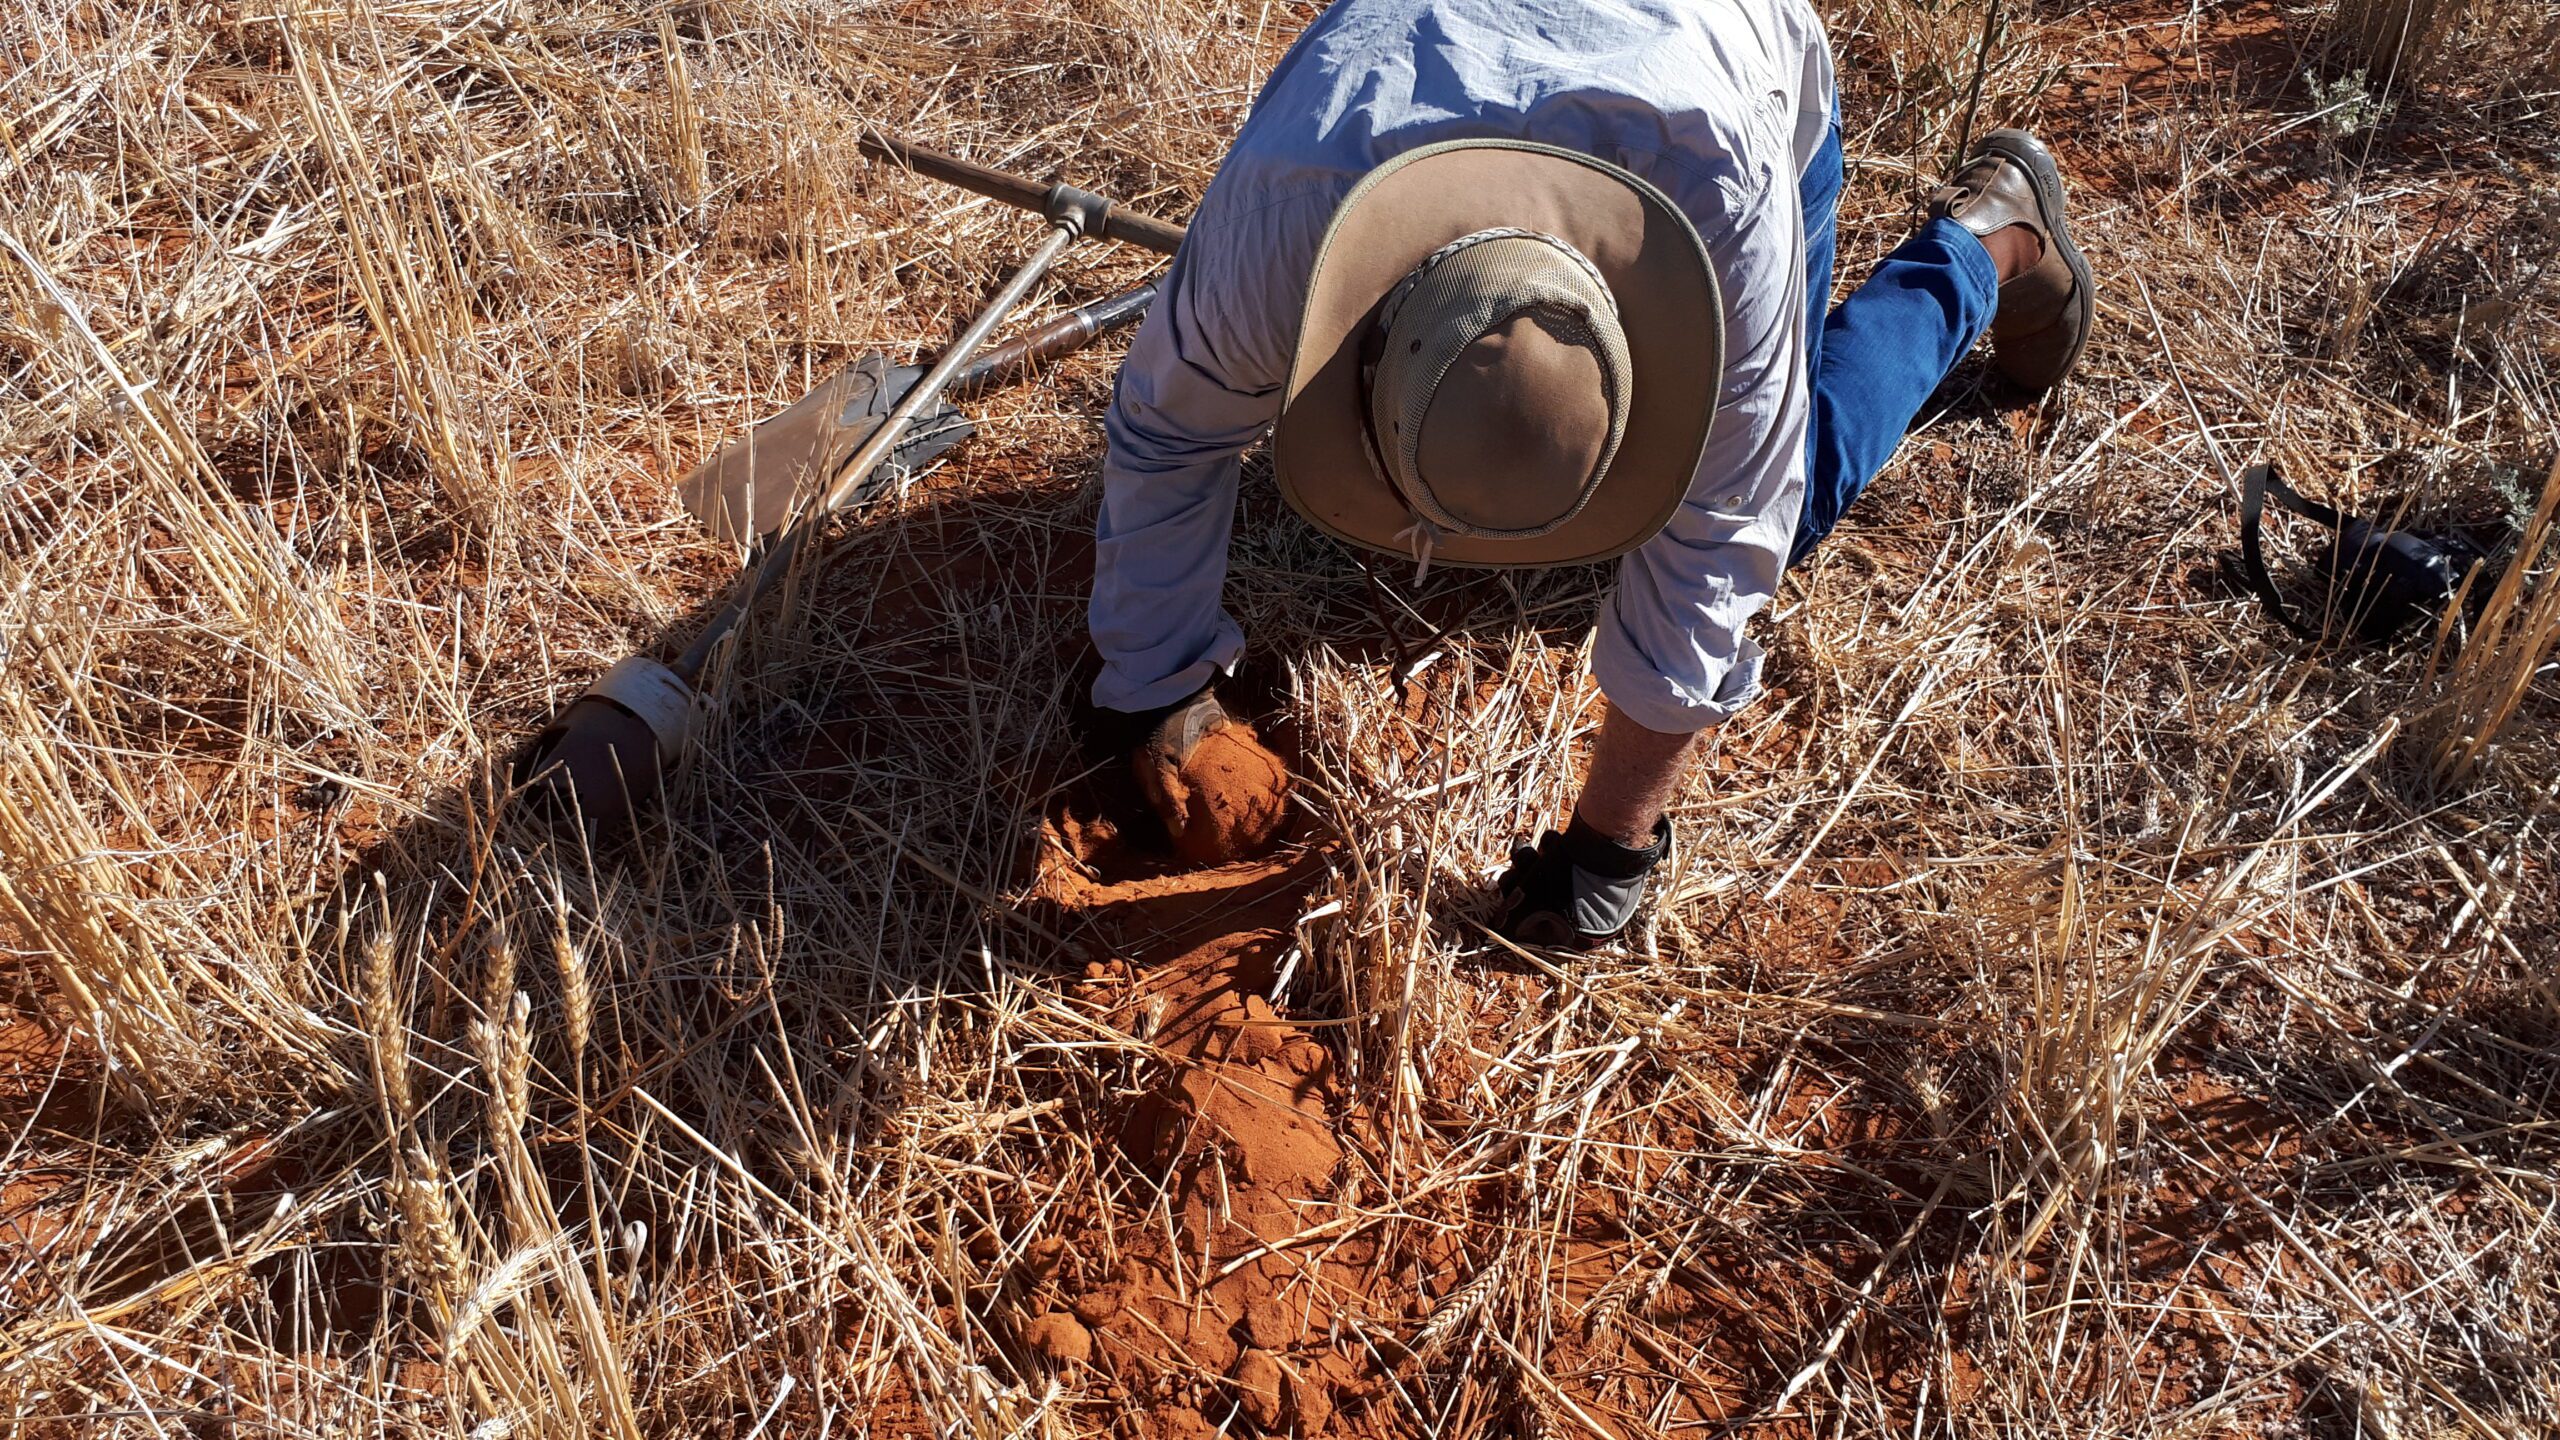 Man in a hat kneeling on the ground with hand in red soil next to a shovel and tool.